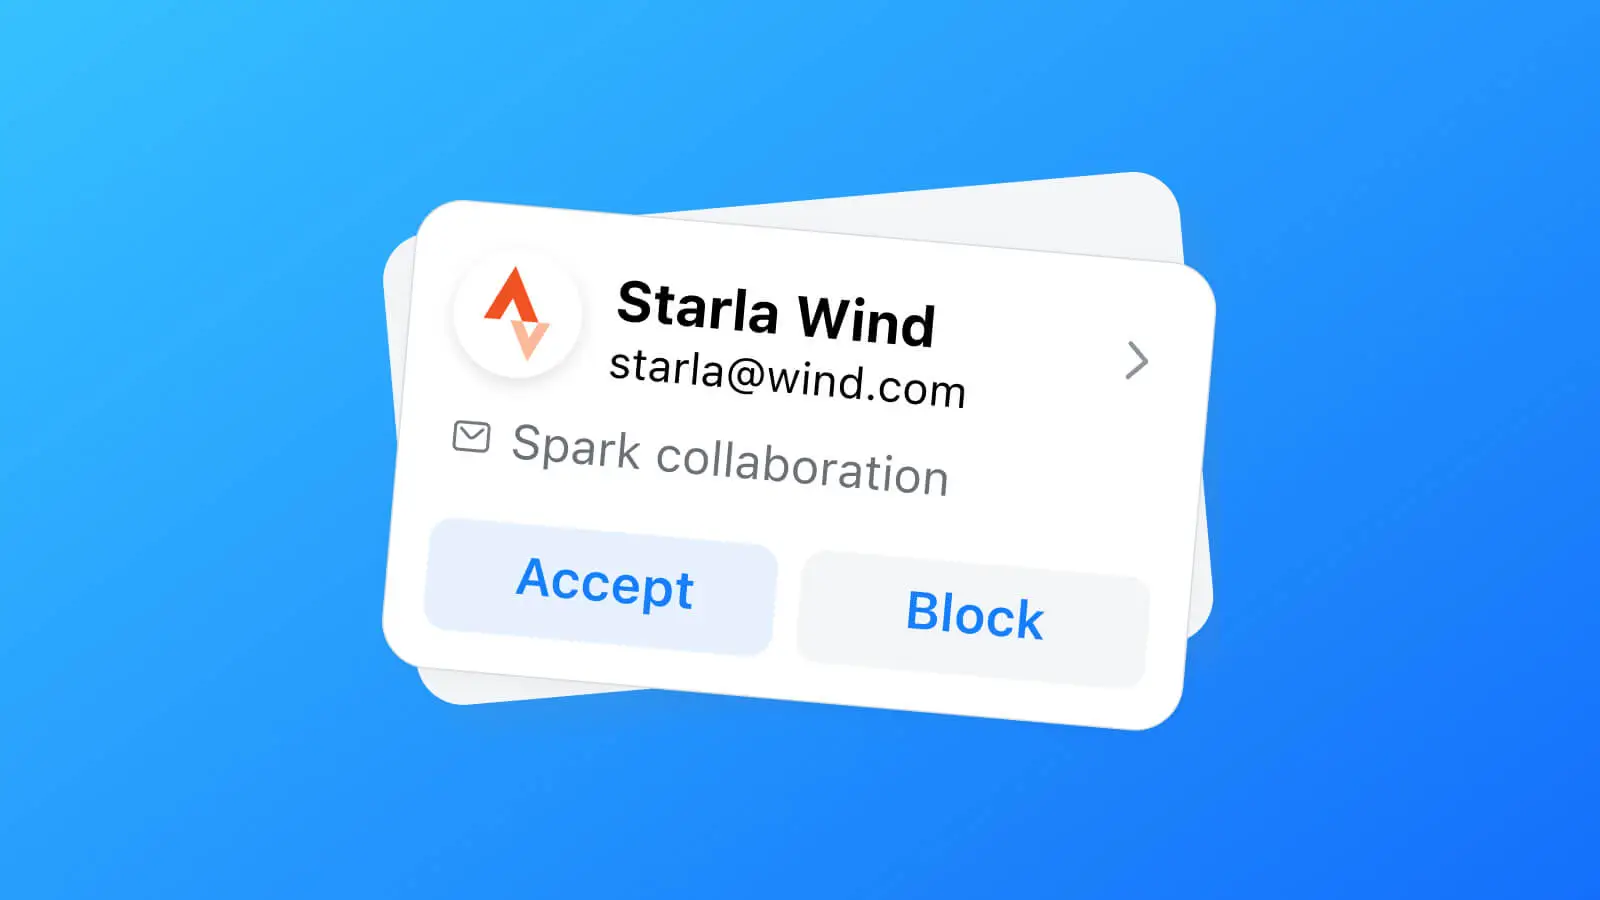 Mark As Done Spark offers to treat emails as tasks and mark them as completed when work is completed. 